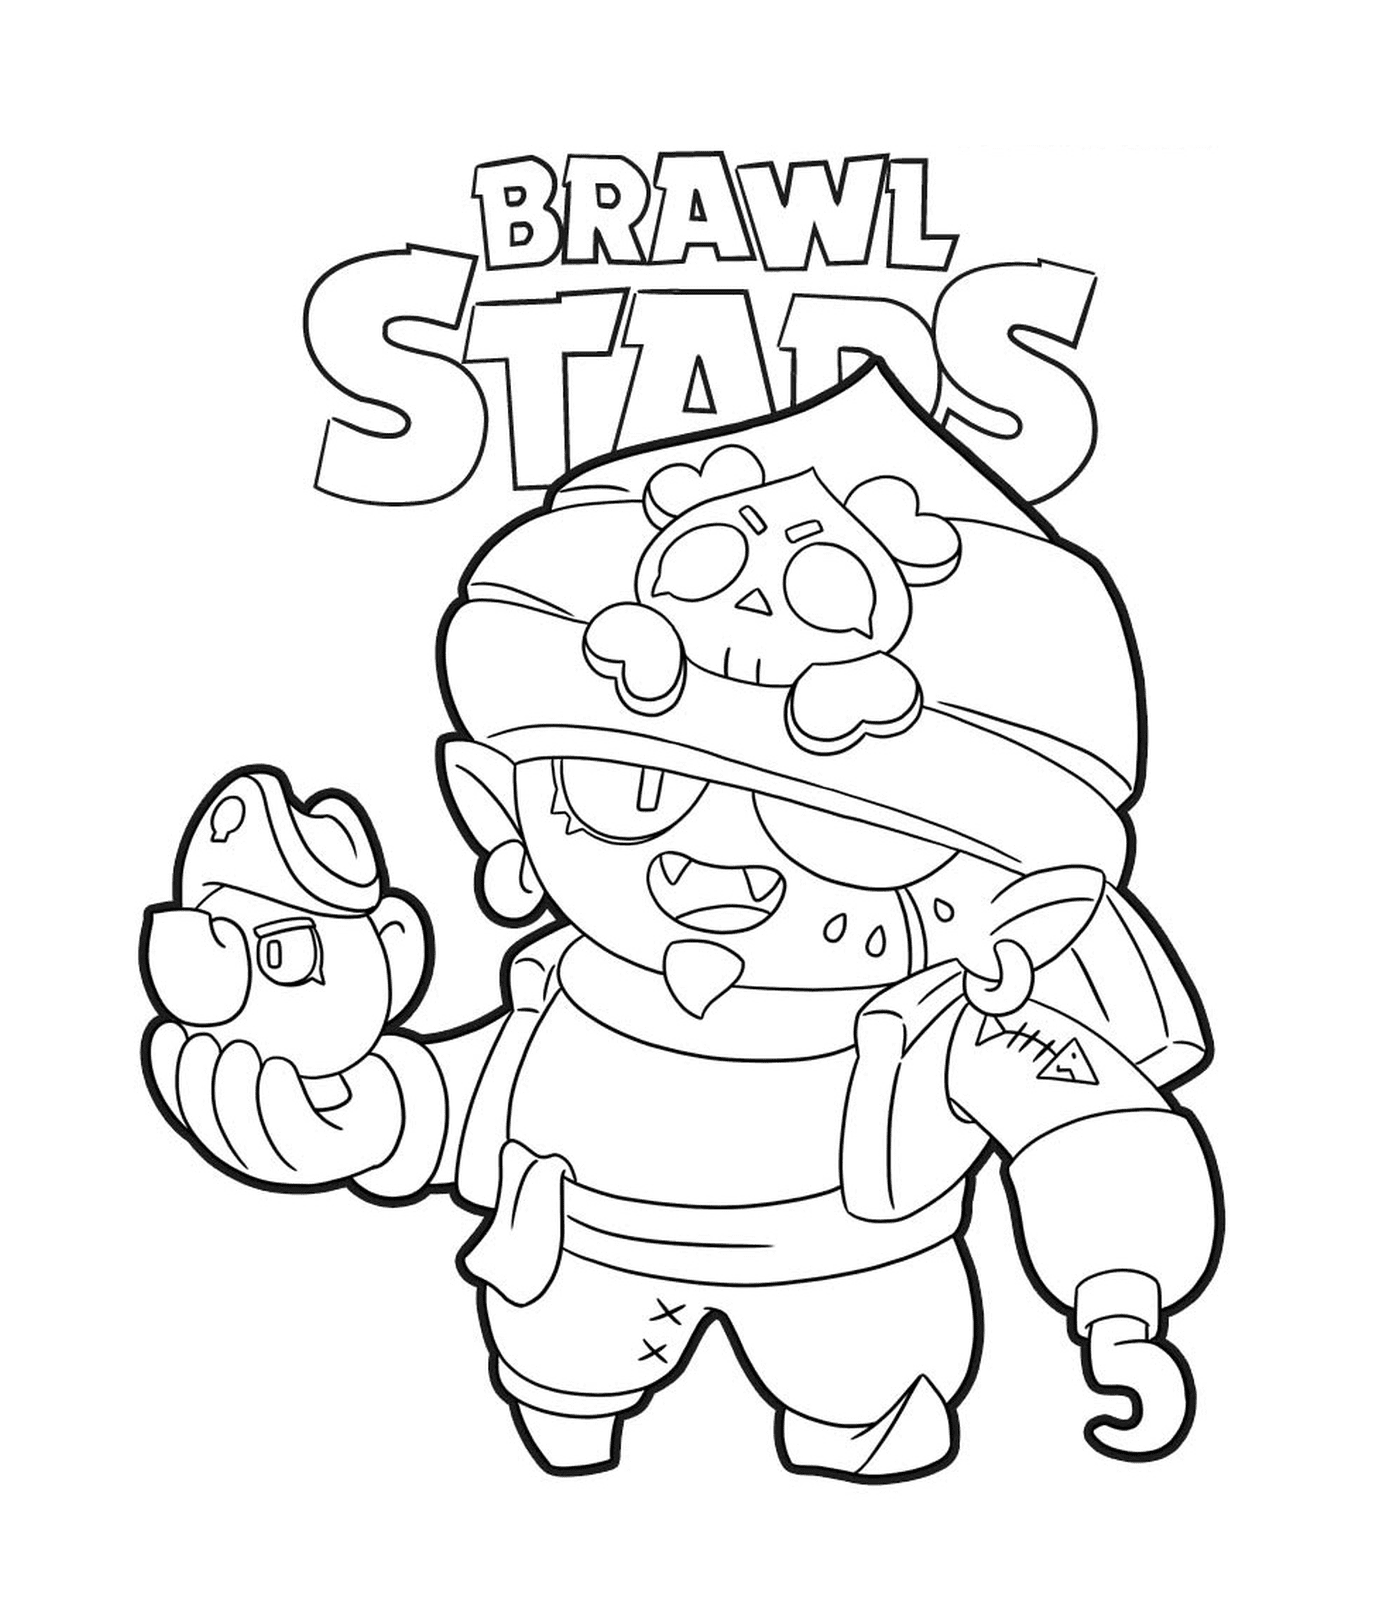  A character from Brawl Stars named Gene the pirate 